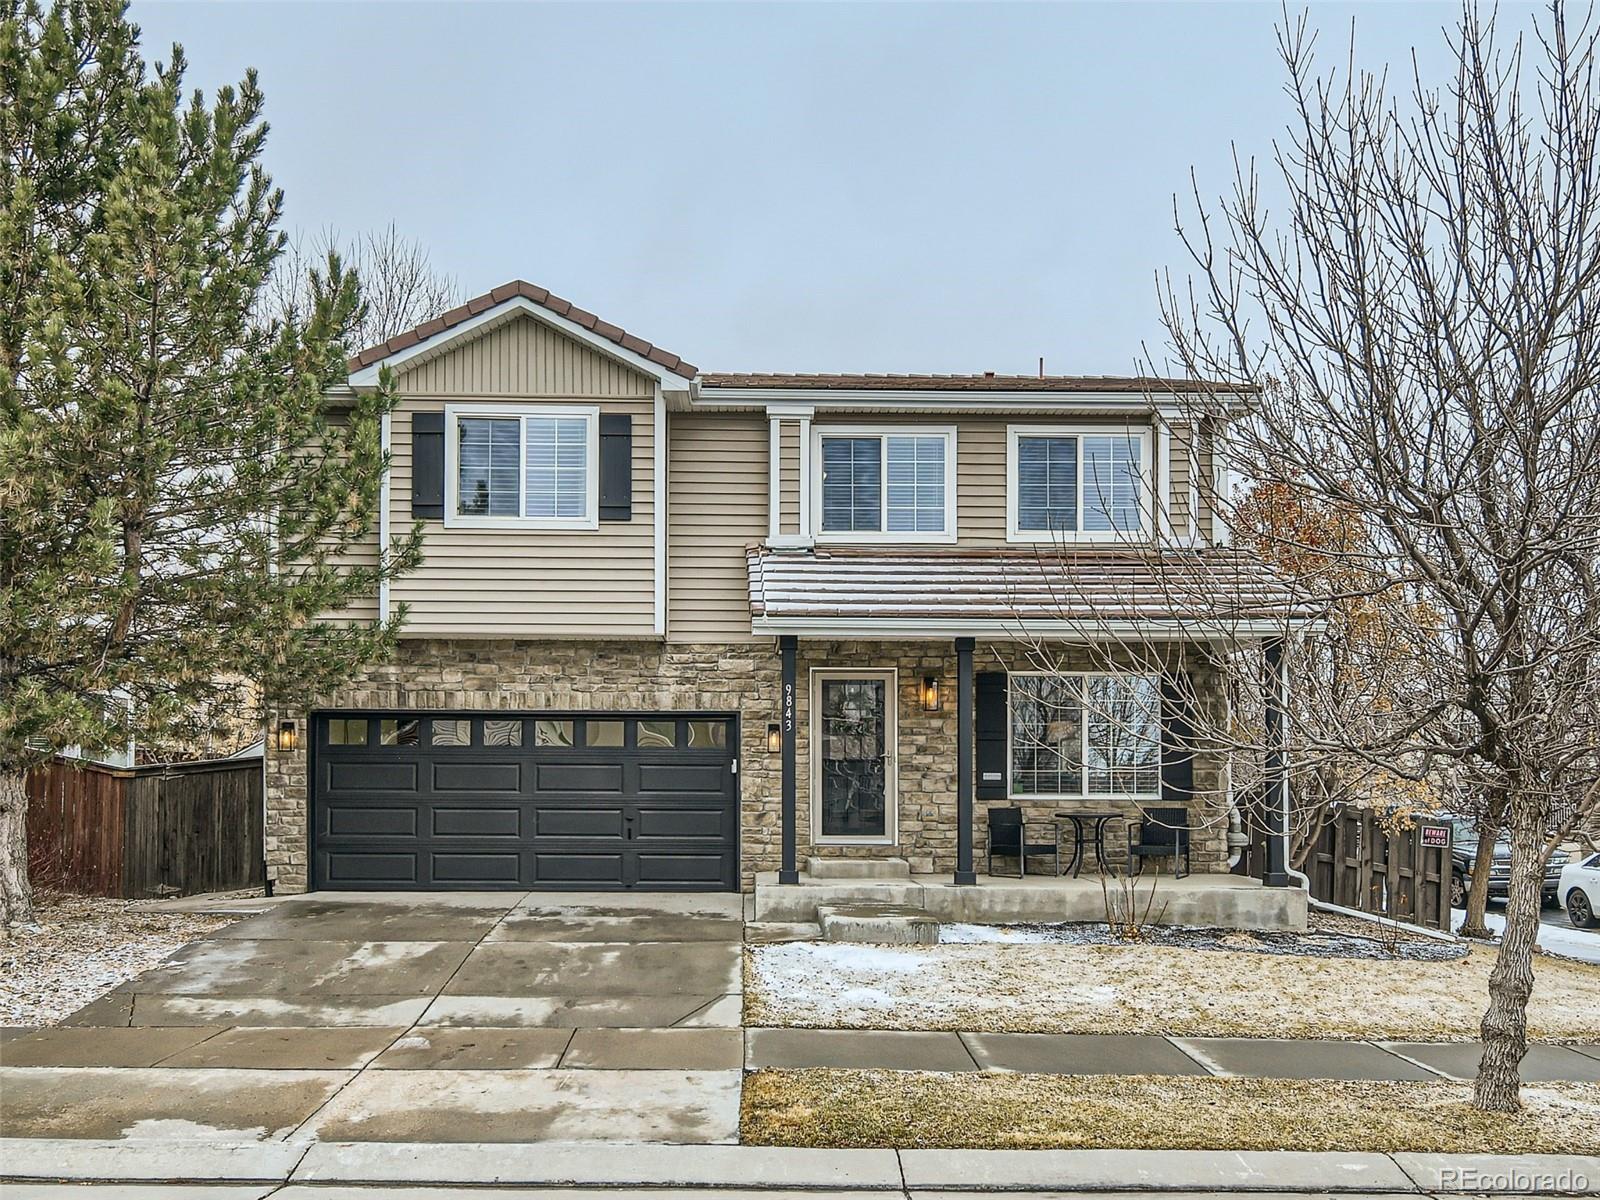 9843  chambers court, Commerce City sold home. Closed on 2024-04-12 for $545,000.